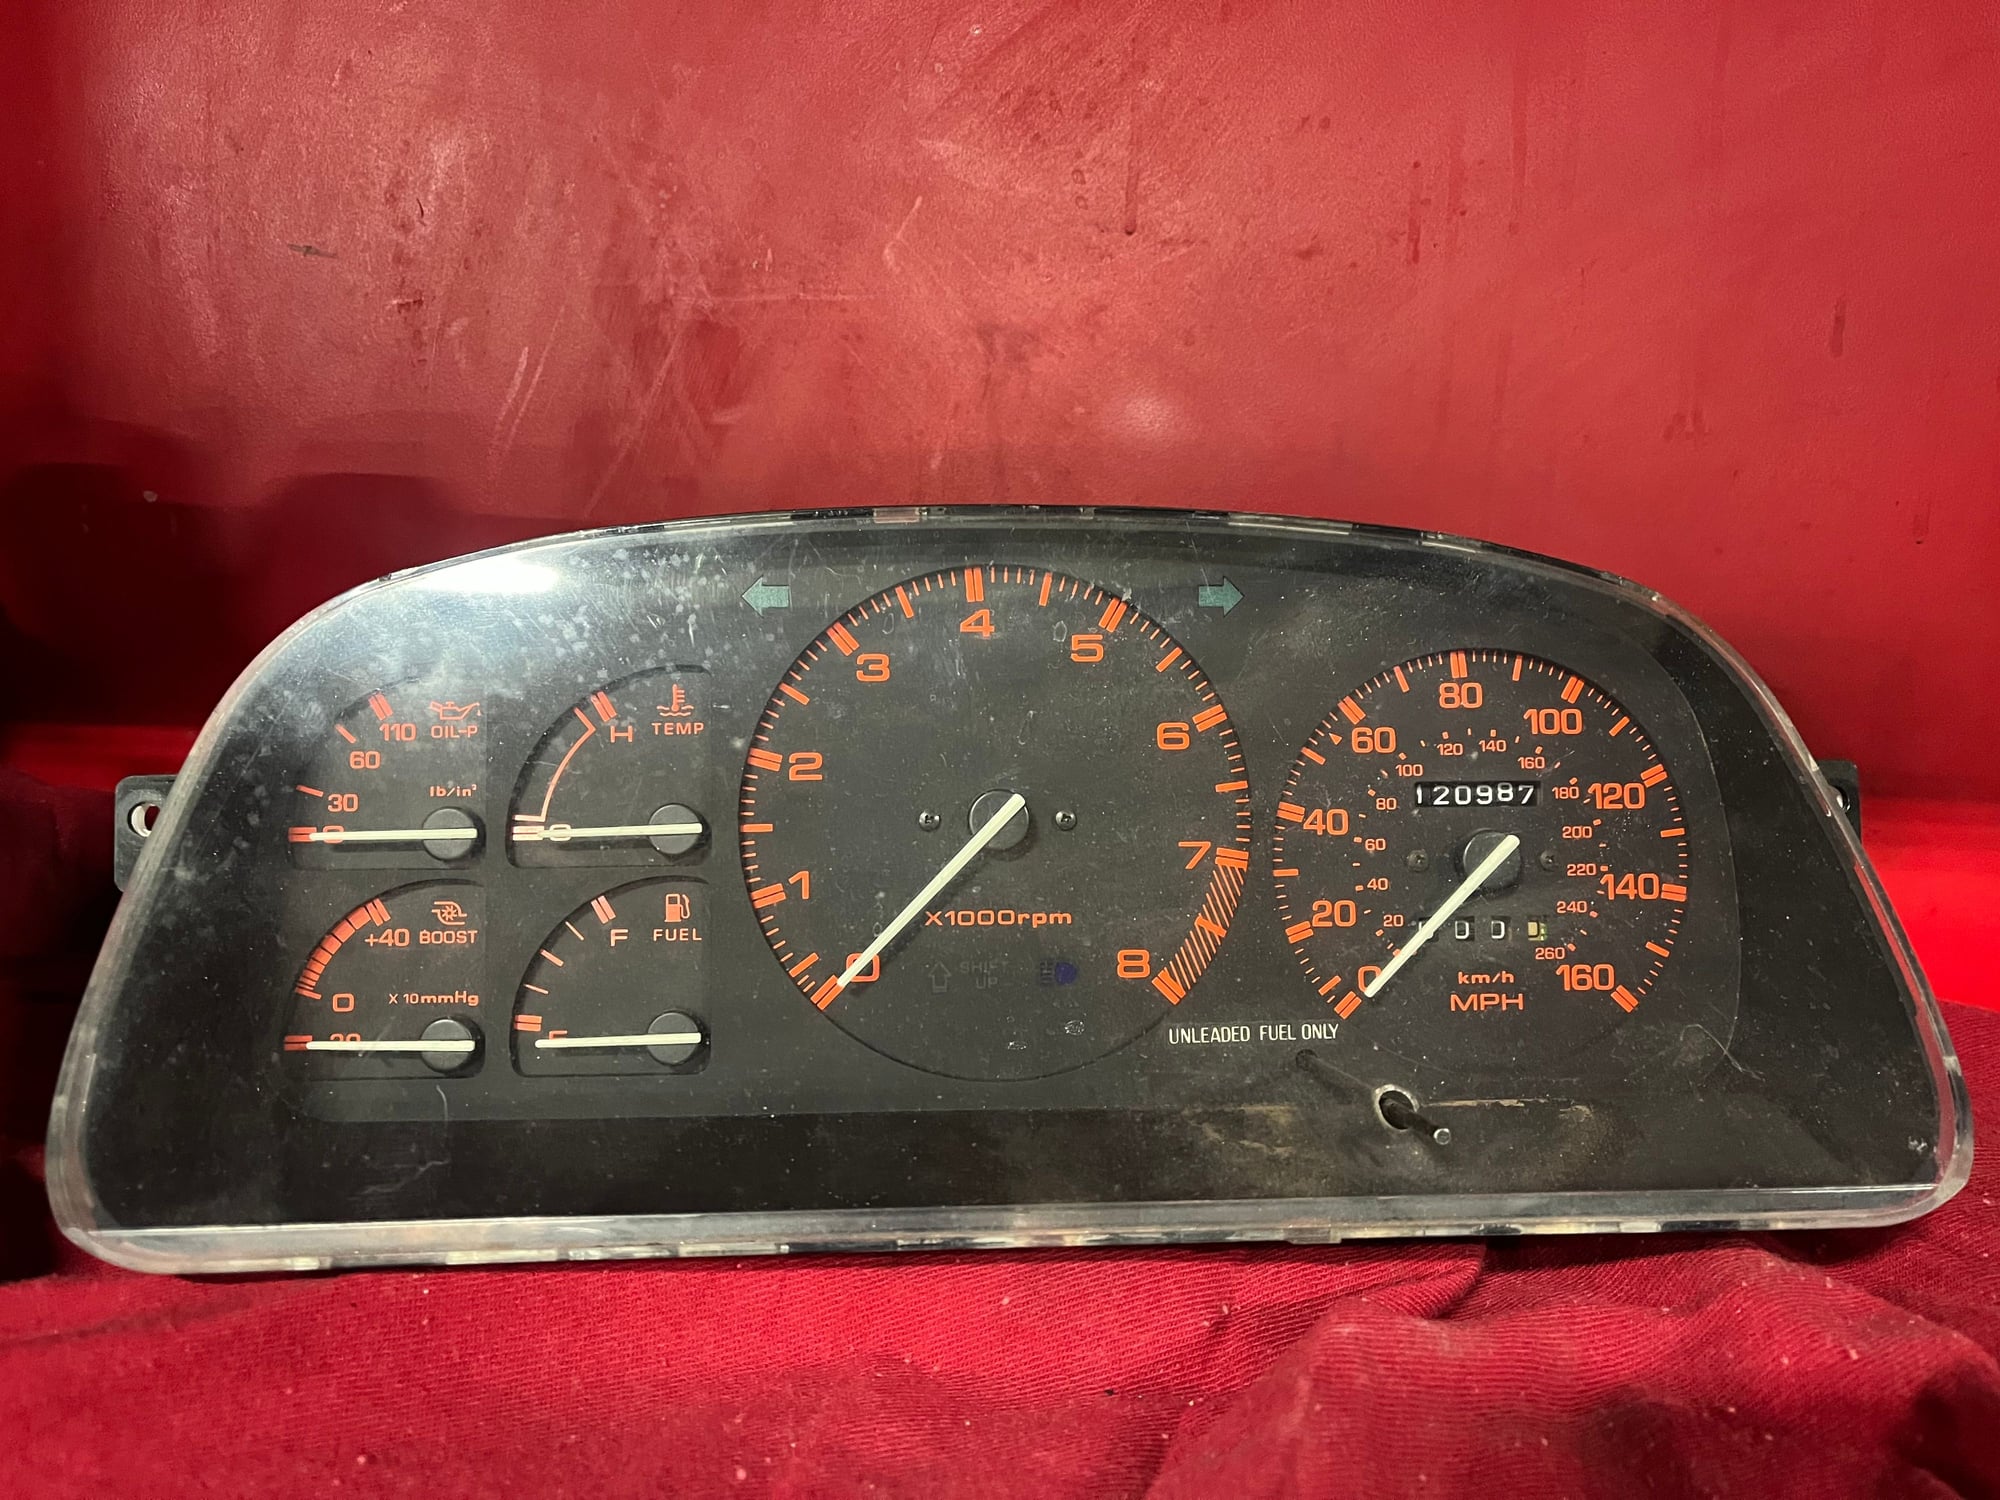 Interior/Upholstery - 1986-1988 RX7 FC S4 Speedometer Gauge Cluster - Used - 1986 to 1988 Mazda RX-7 - Flagstaff, AZ 86001, United States